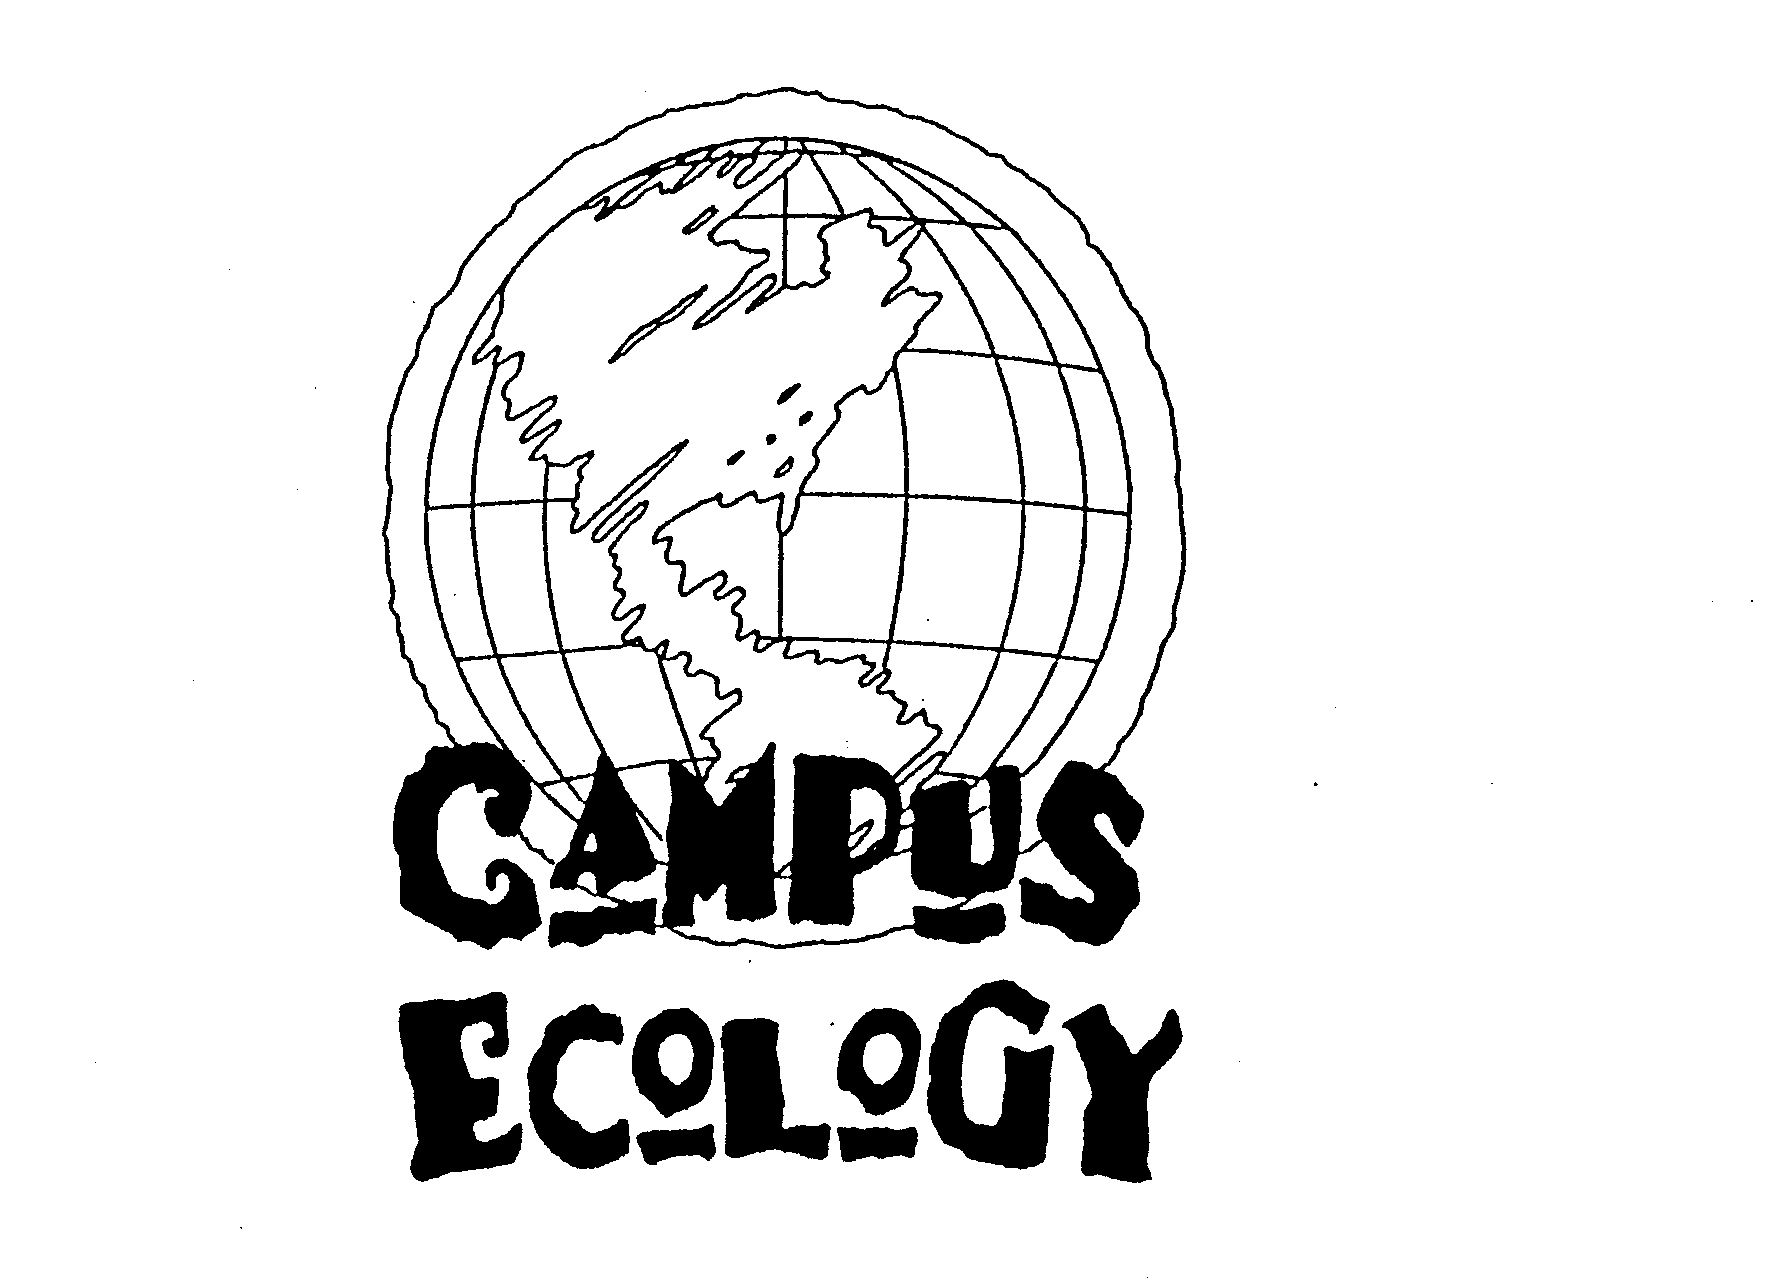  CAMPUS ECOLOGY